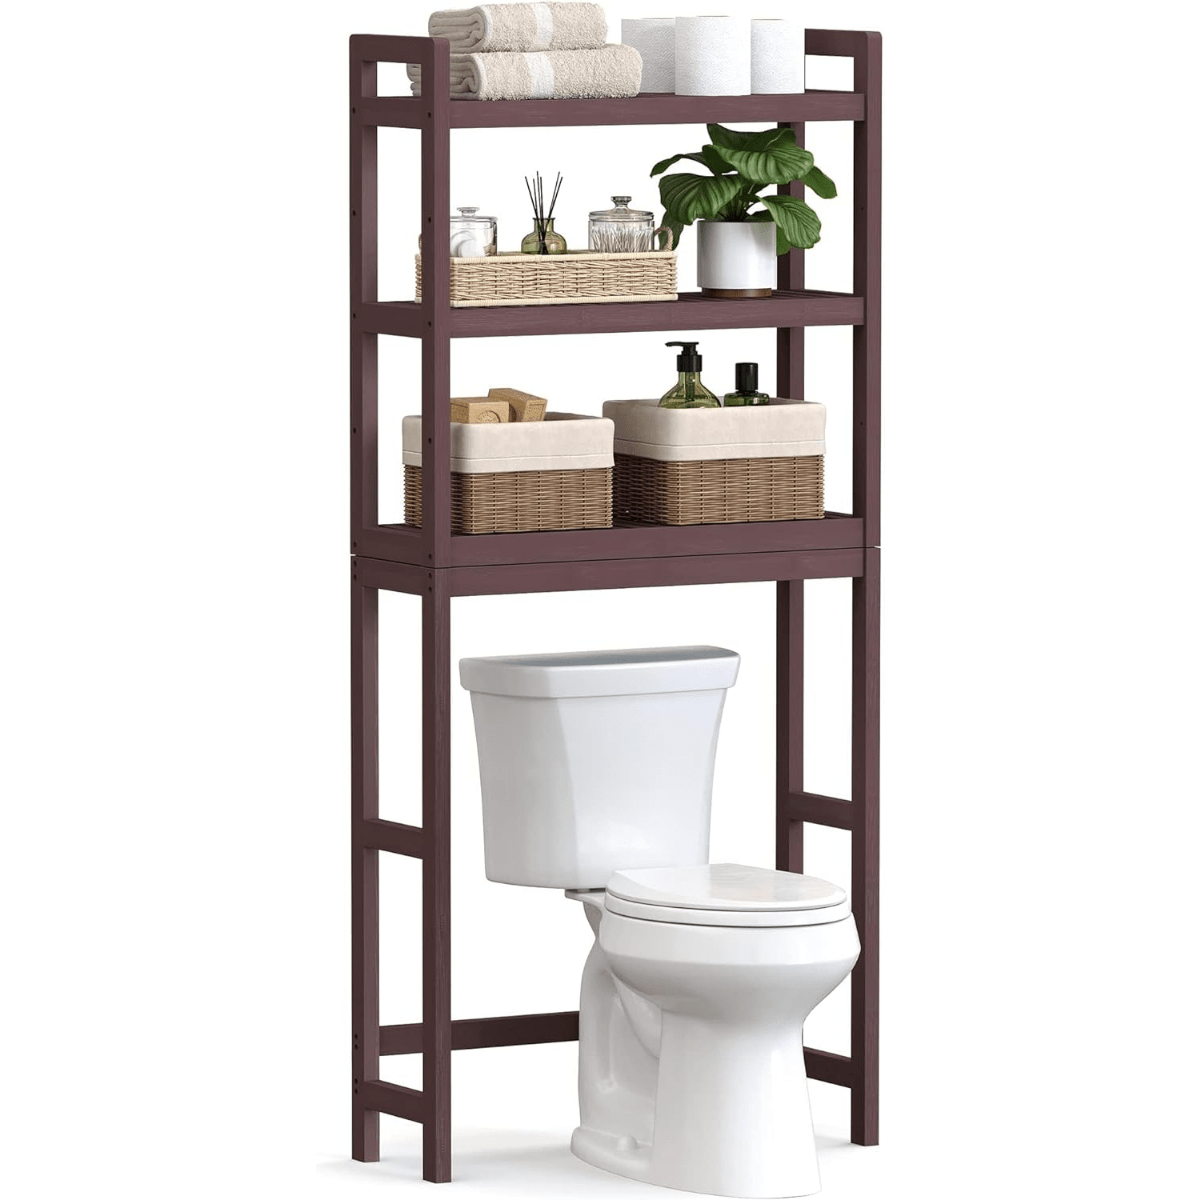 

Songmics Over The Toilet Storage, 3-tier Bamboo Over Toilet Bathroom Organizer With Adjustable Shelf, Fit Most Toilets, Space-saving, Easy Assembly